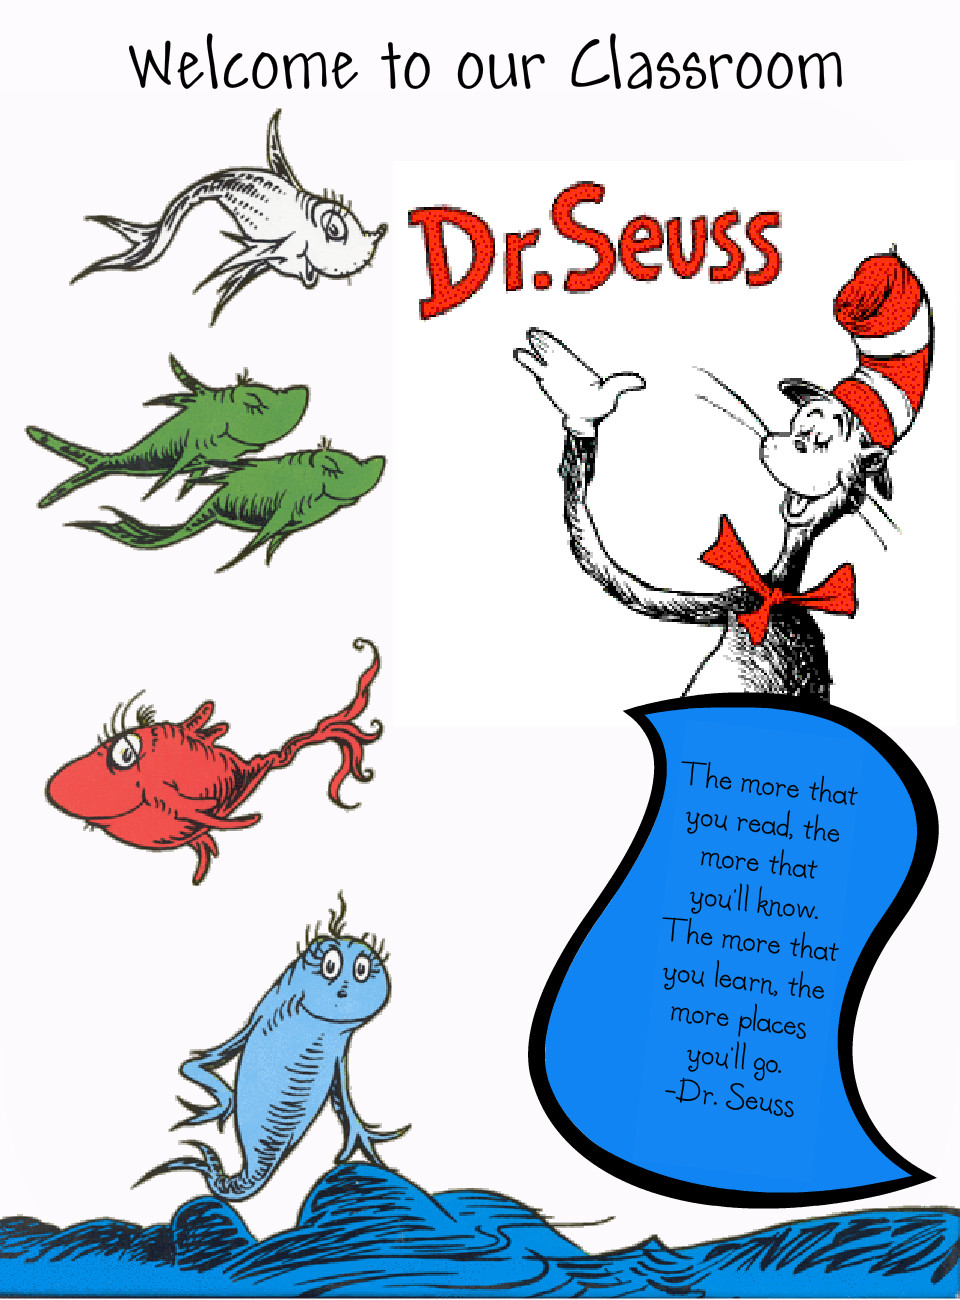 One Fish Two Fish Red Fish Blue Fish | Pinterest | One fish two fish, Clip art and Dr. seuss